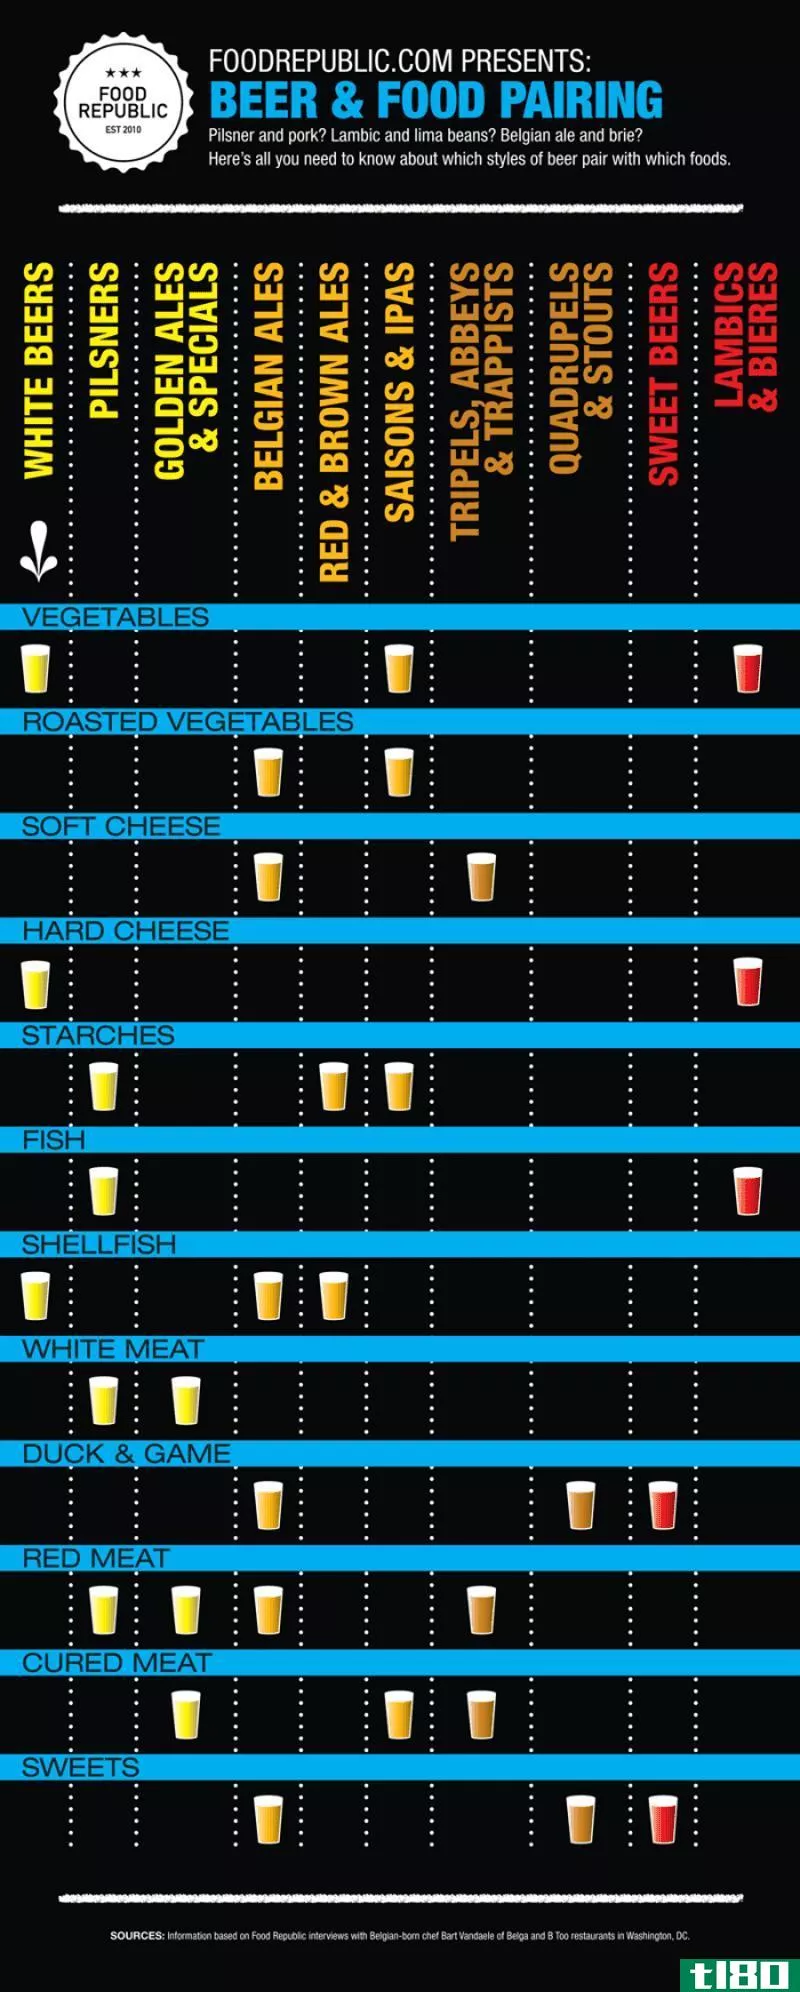 Illustration for article titled Find the Best Food and Beer Pairings With This Handy Chart